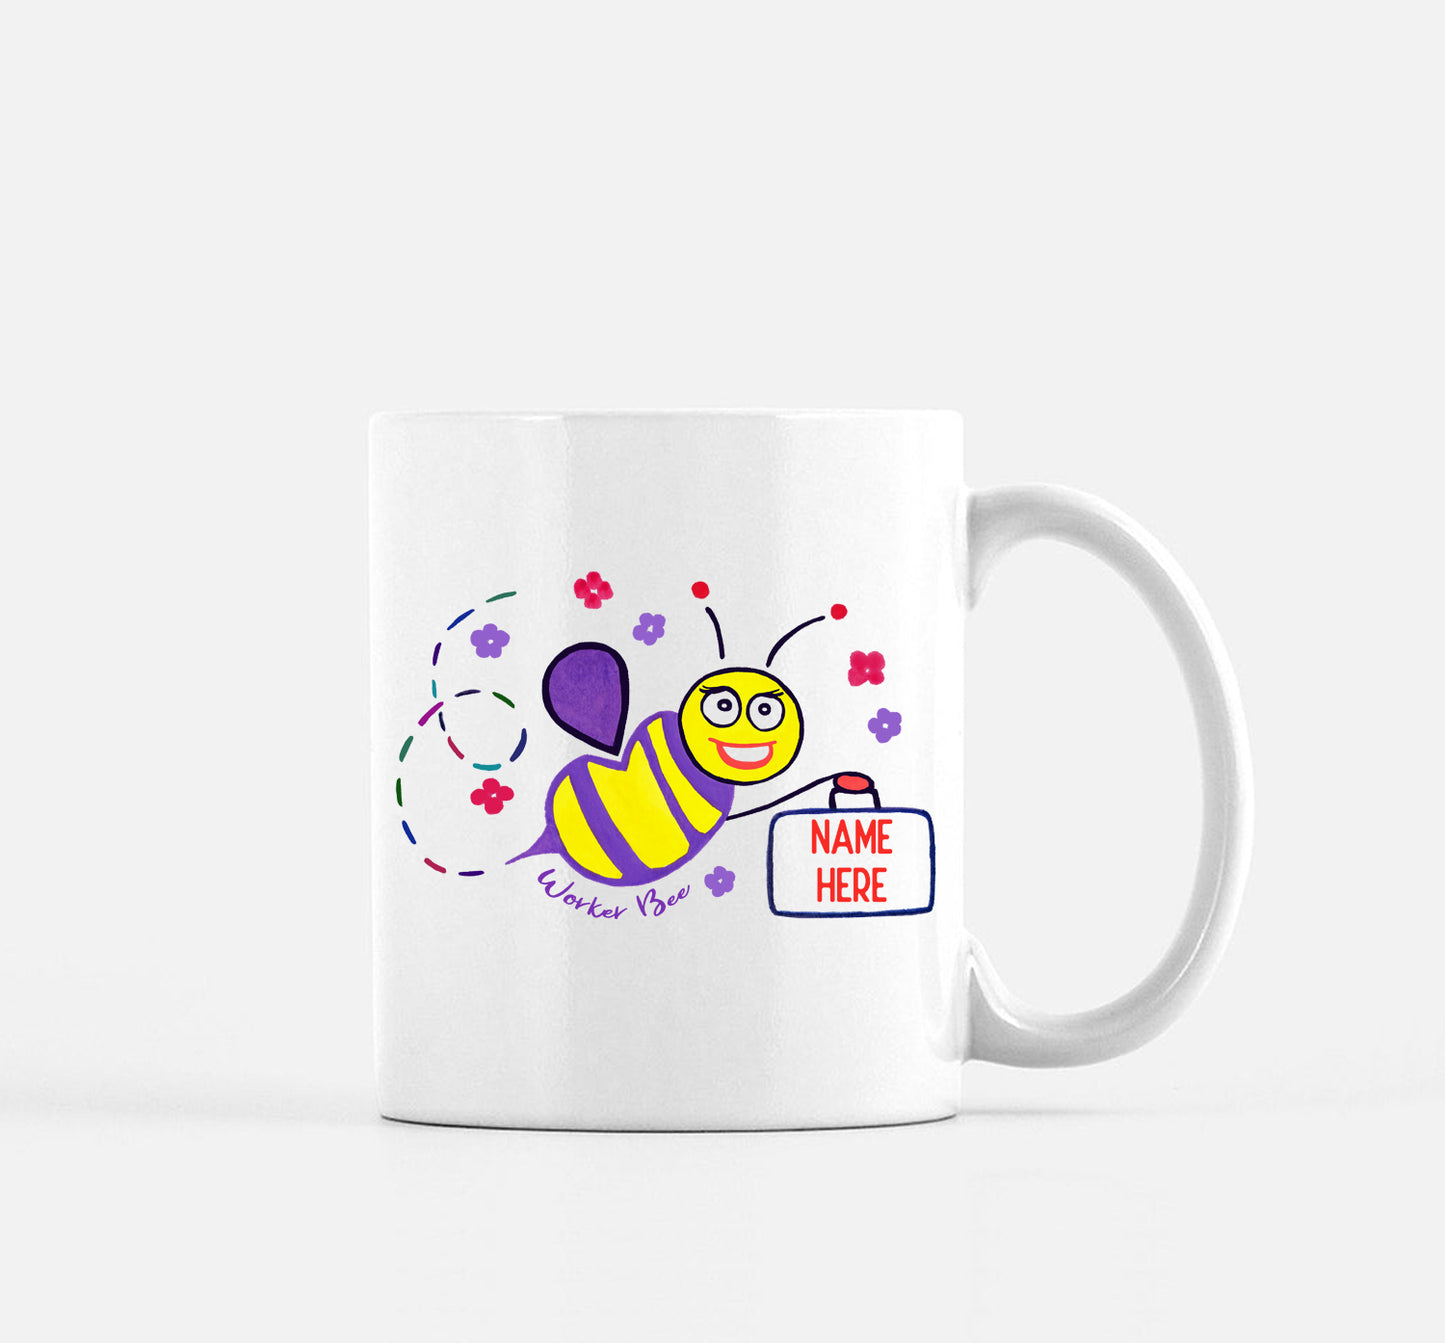 Worker Bee Mug Personalized Coworker Gift by The Office Art Guy